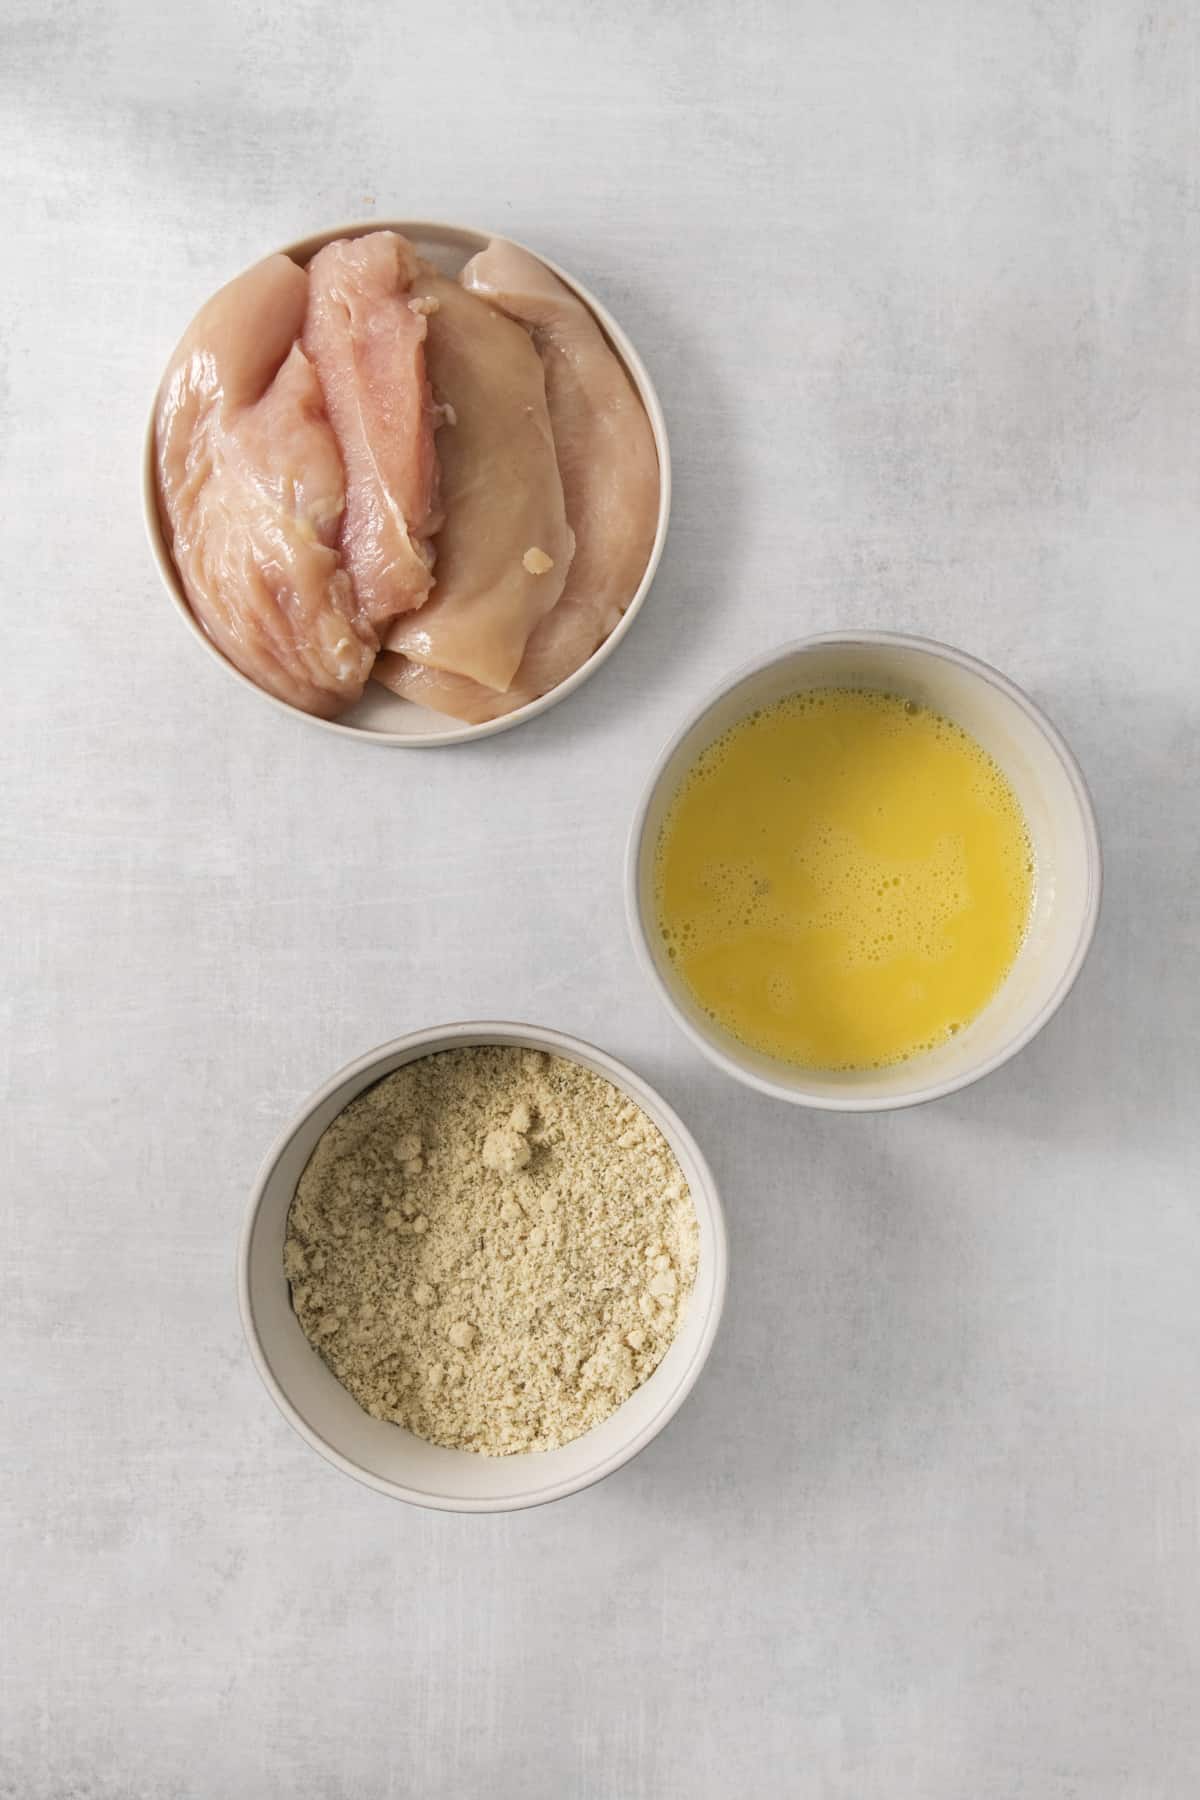 chicken cutlet ingredients in separate dishes.